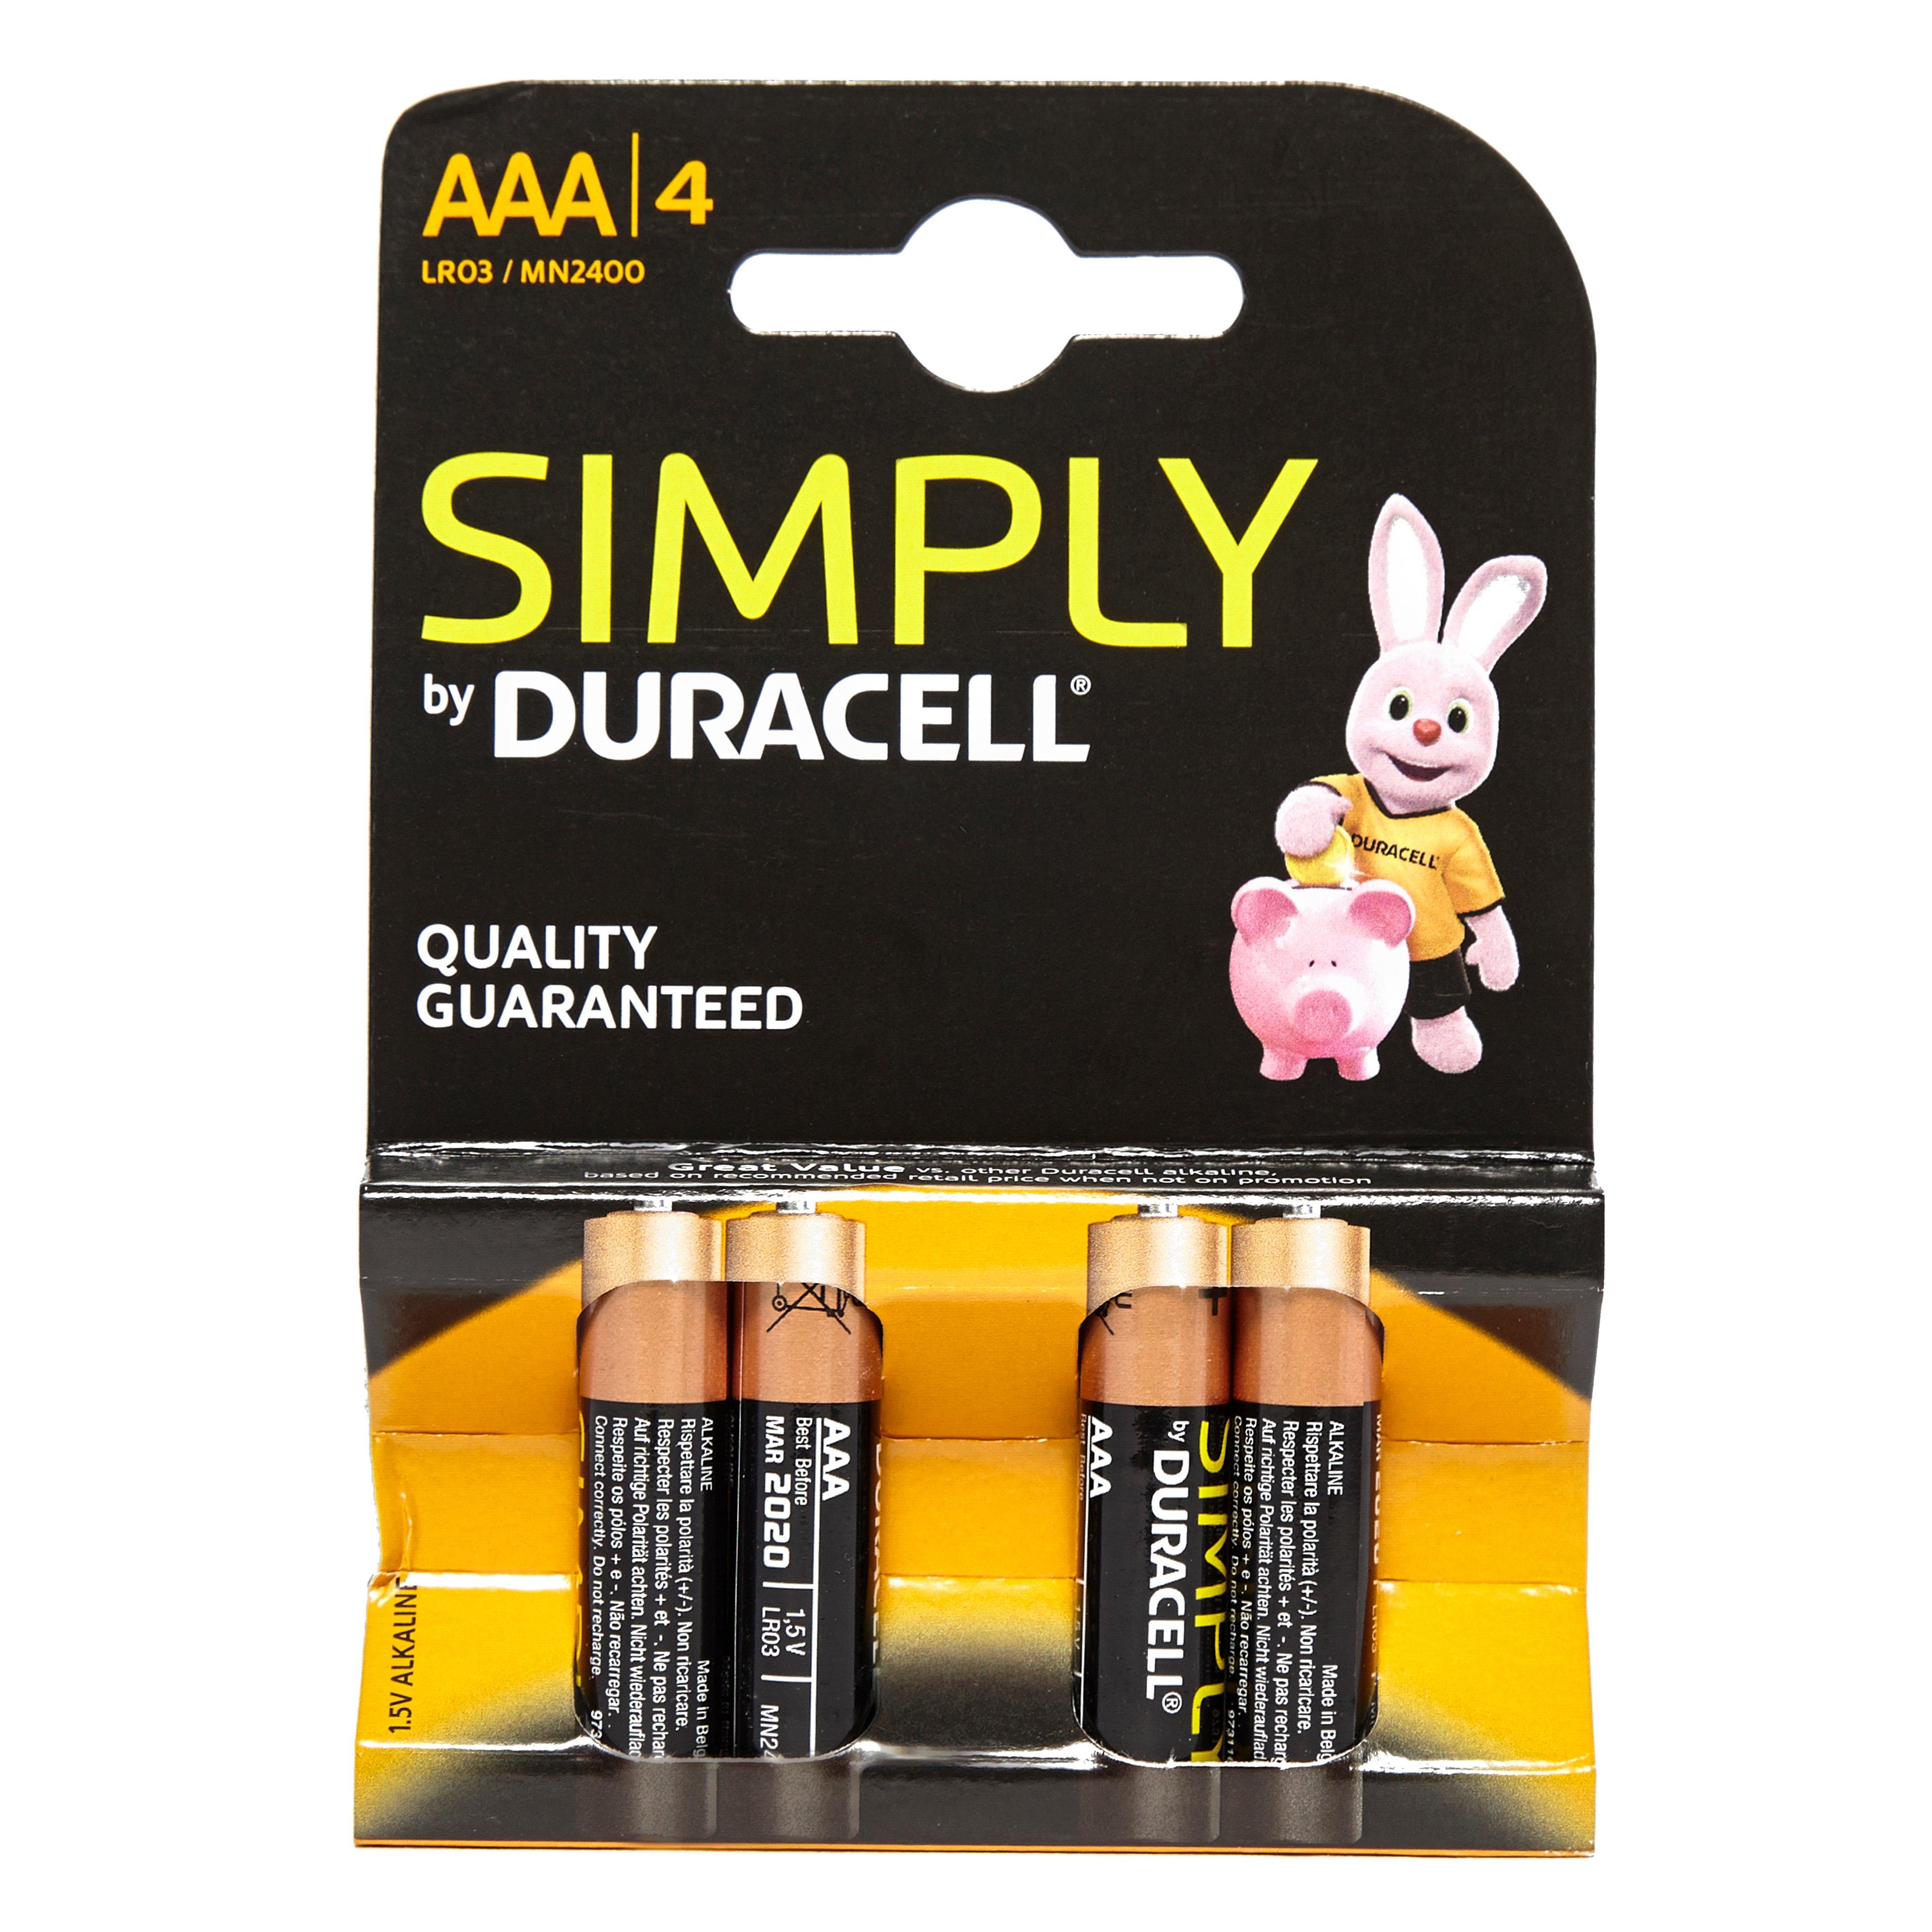 Duracell Simply AAA Batteries (4 pack) Review